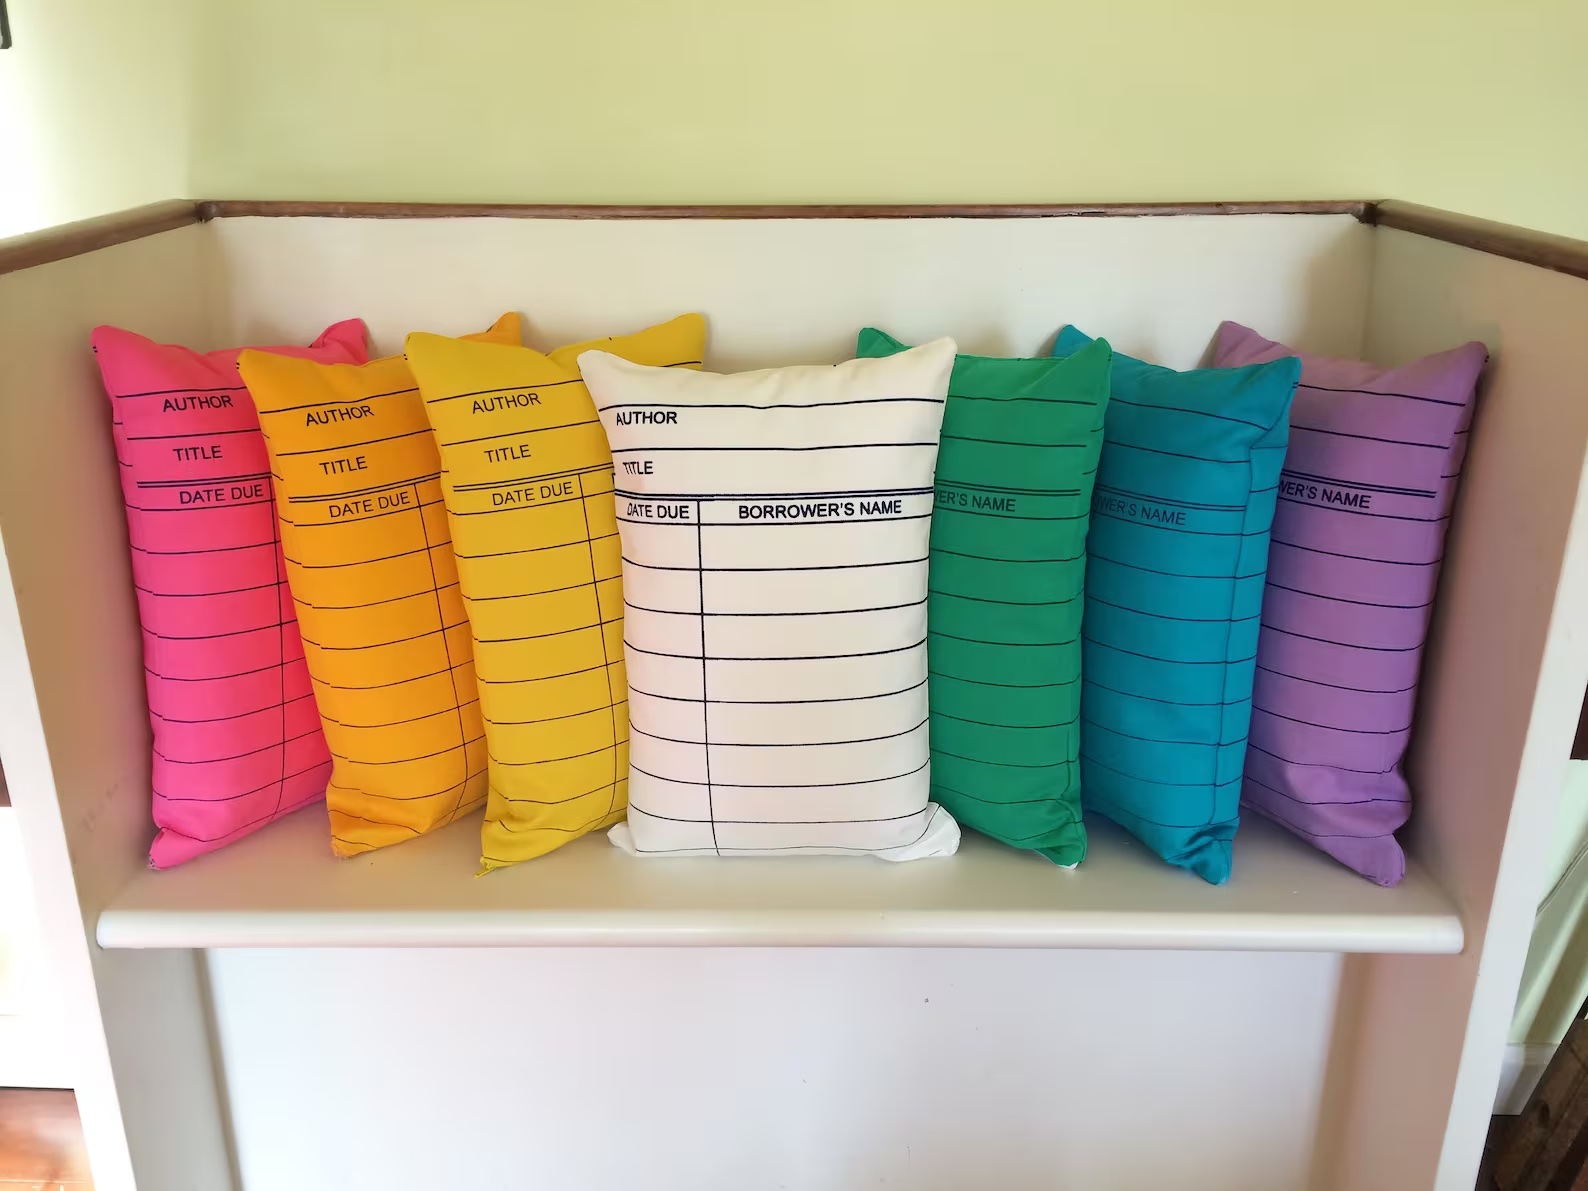 a photo of seven pillows made to look like a library card. Each one is a different color of the rainbow.